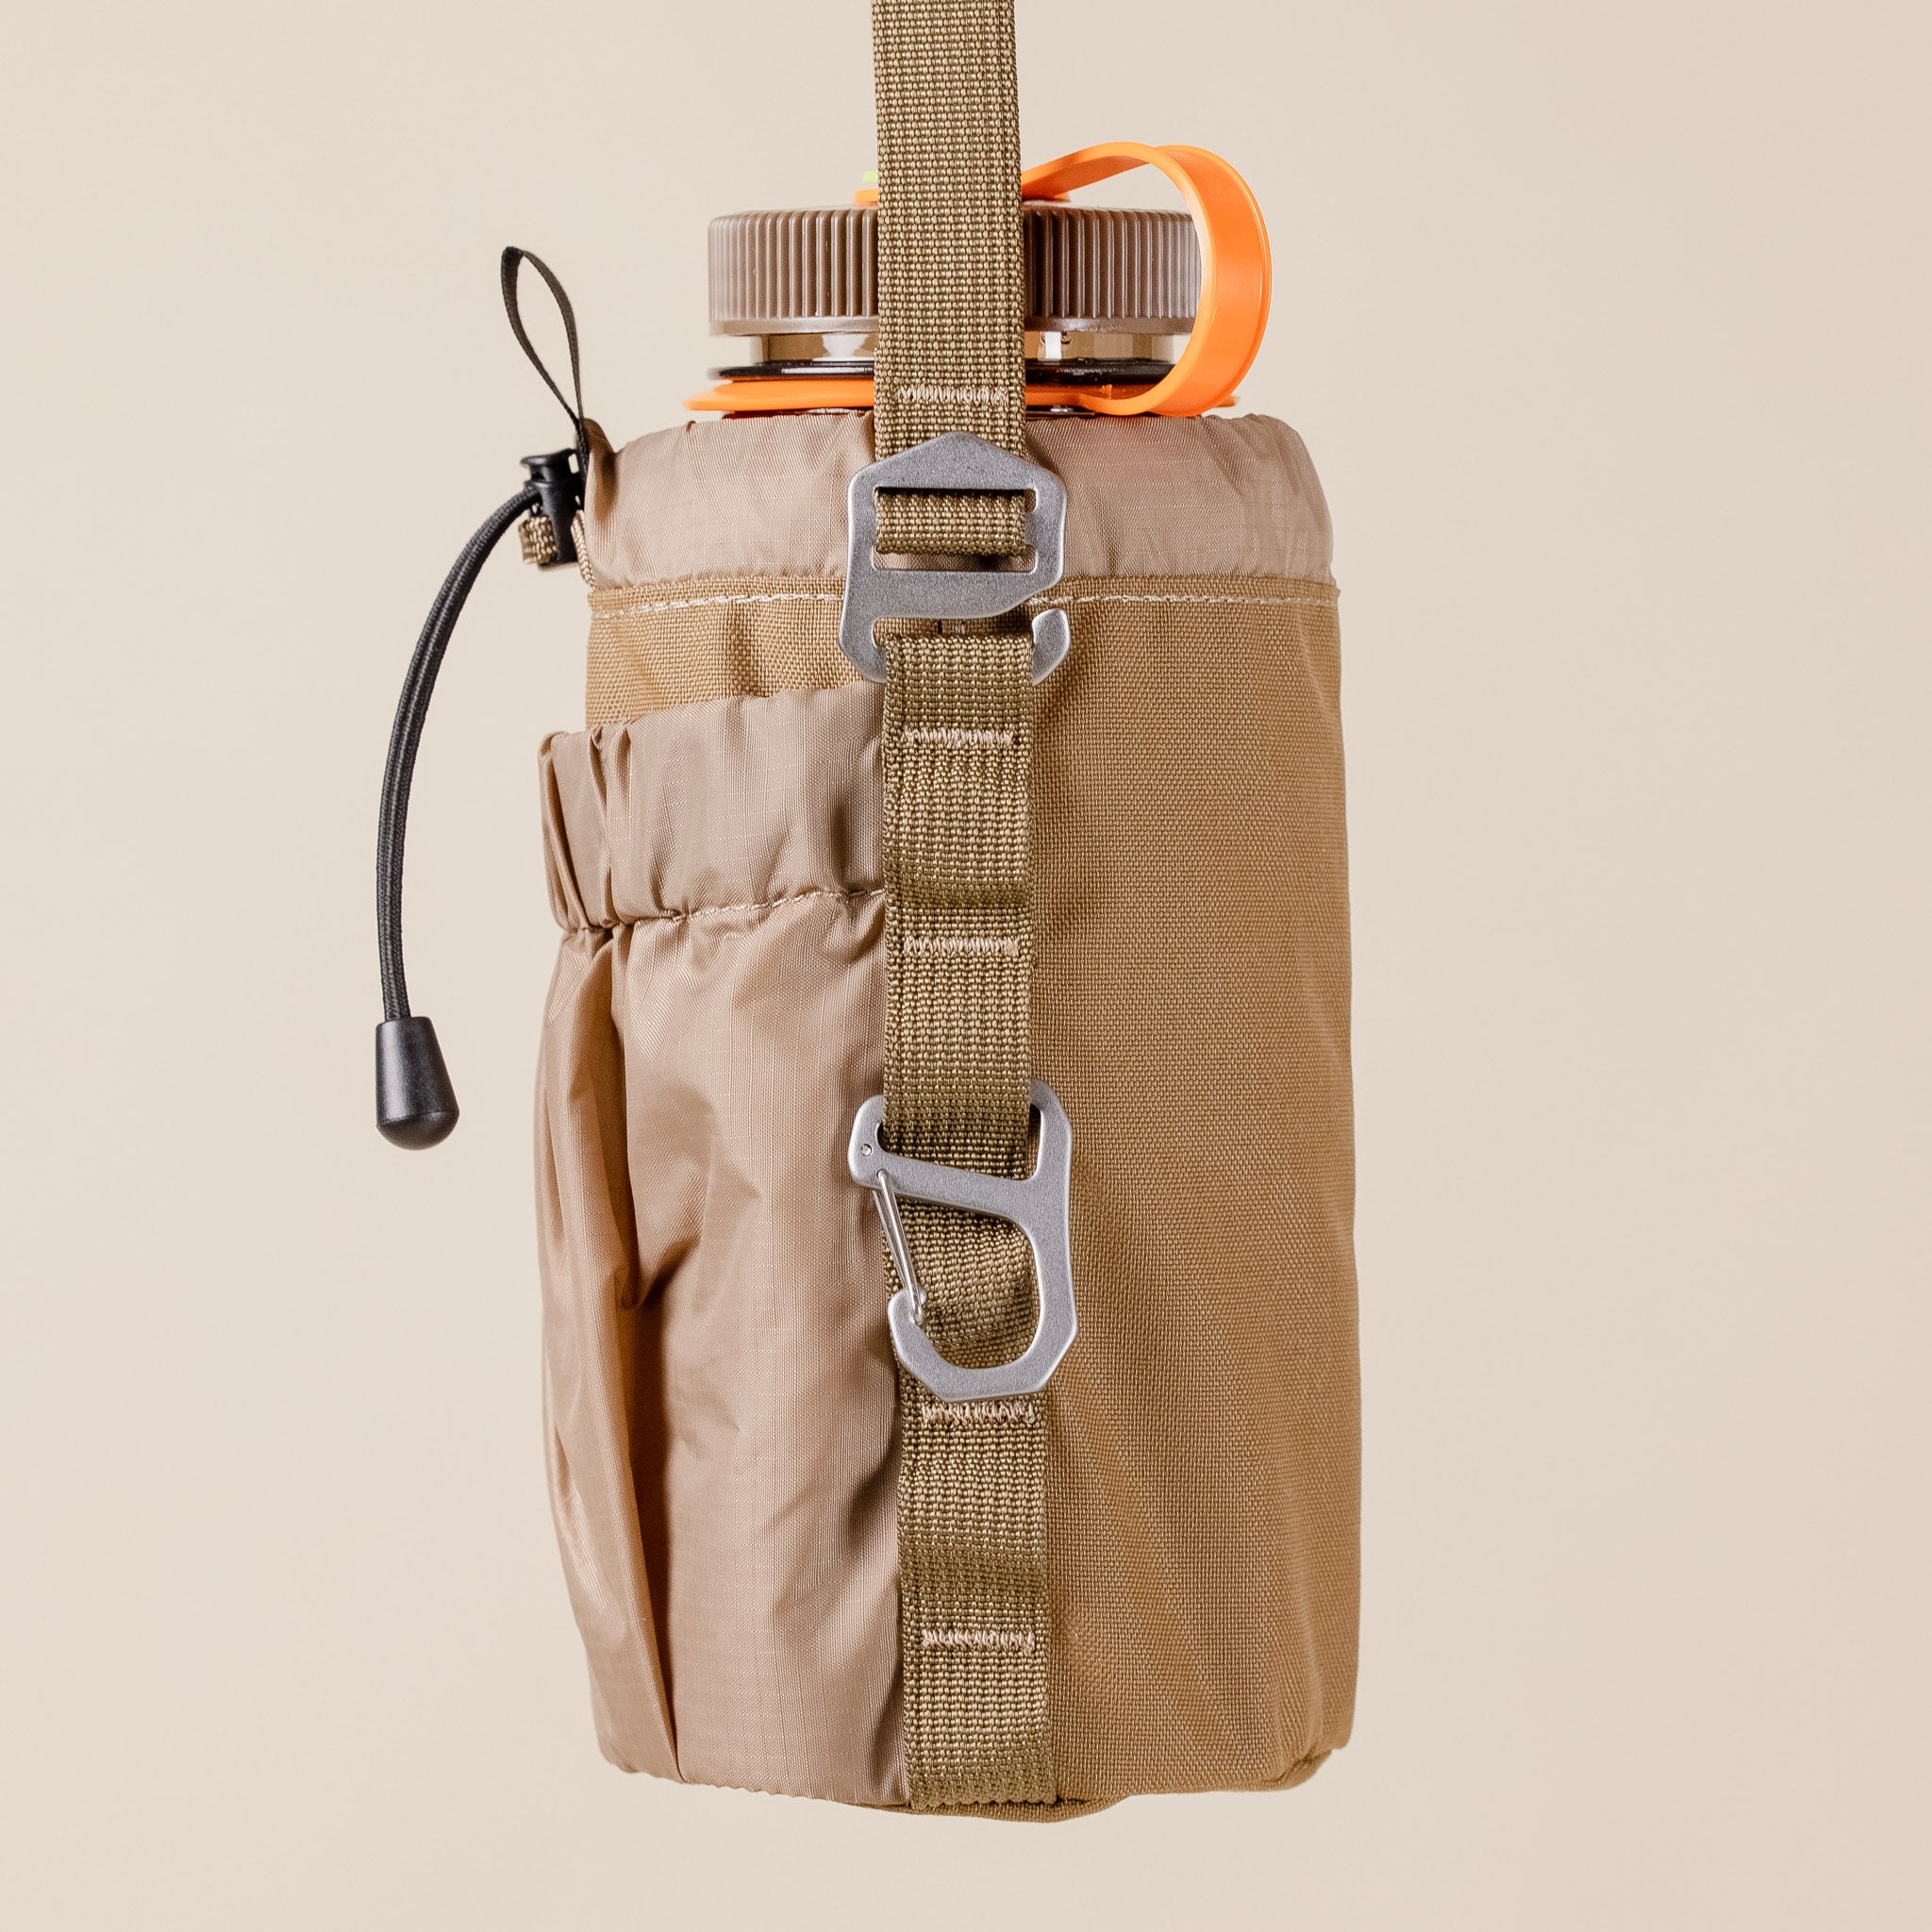 This Thing - 1ltr Nalgene Bottle Bag - Khaki Beige This Thing Of Ours